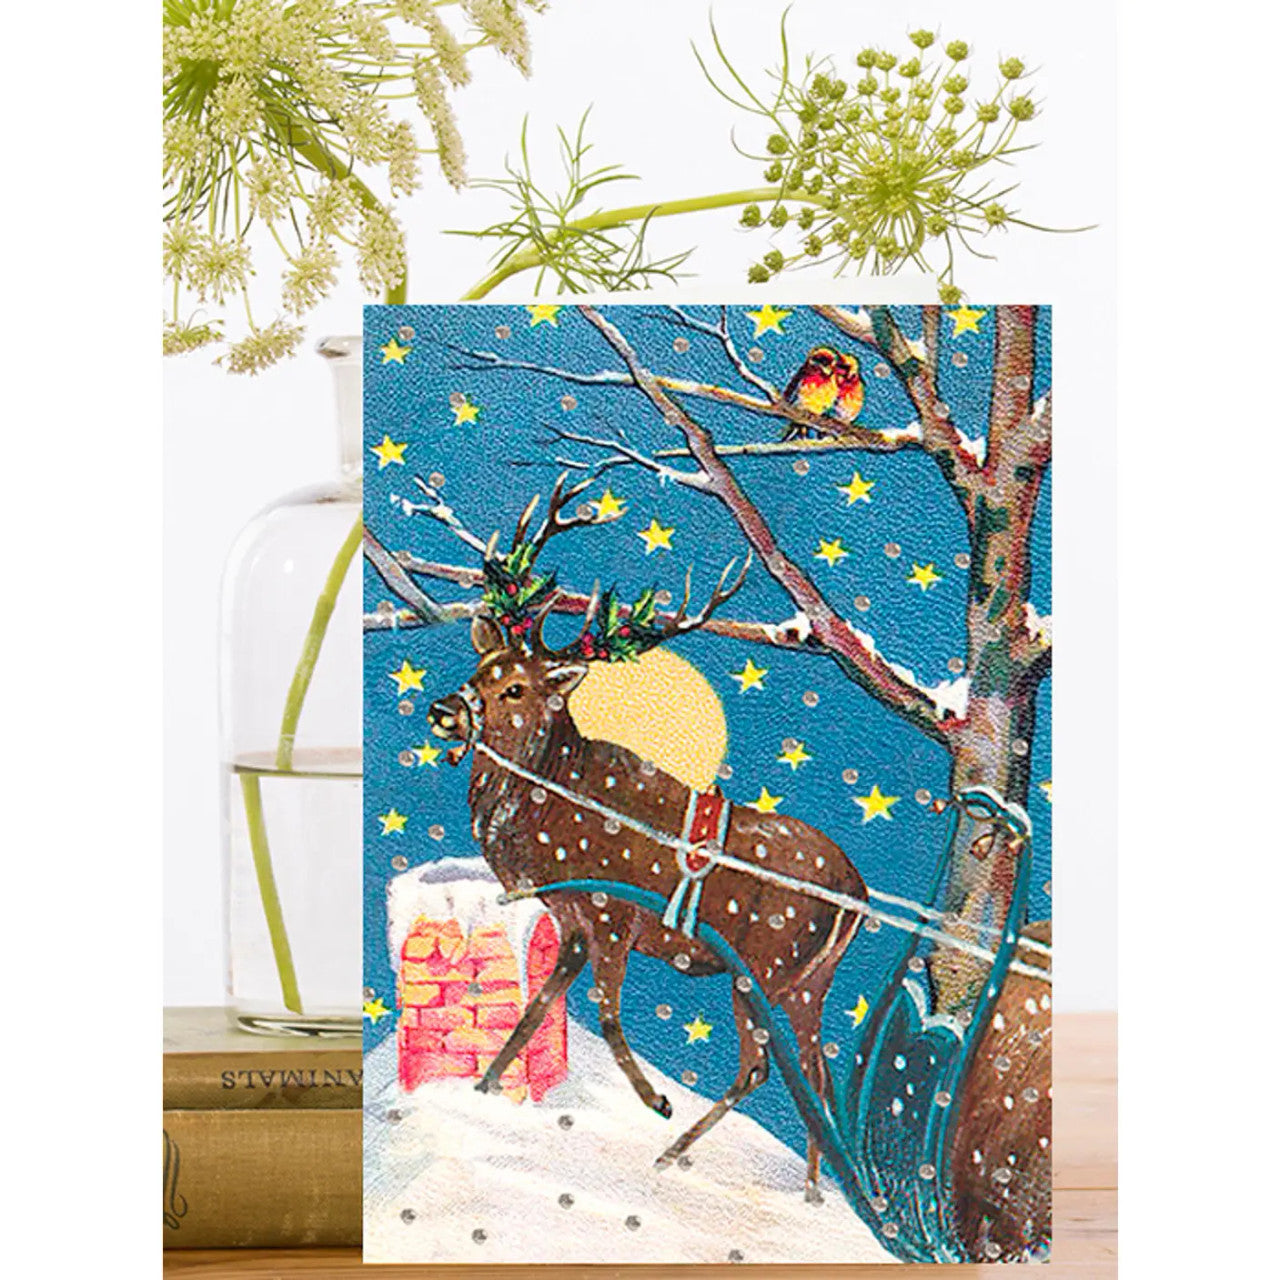 Starry Winter Night Christmas Card by Madame Treacle.